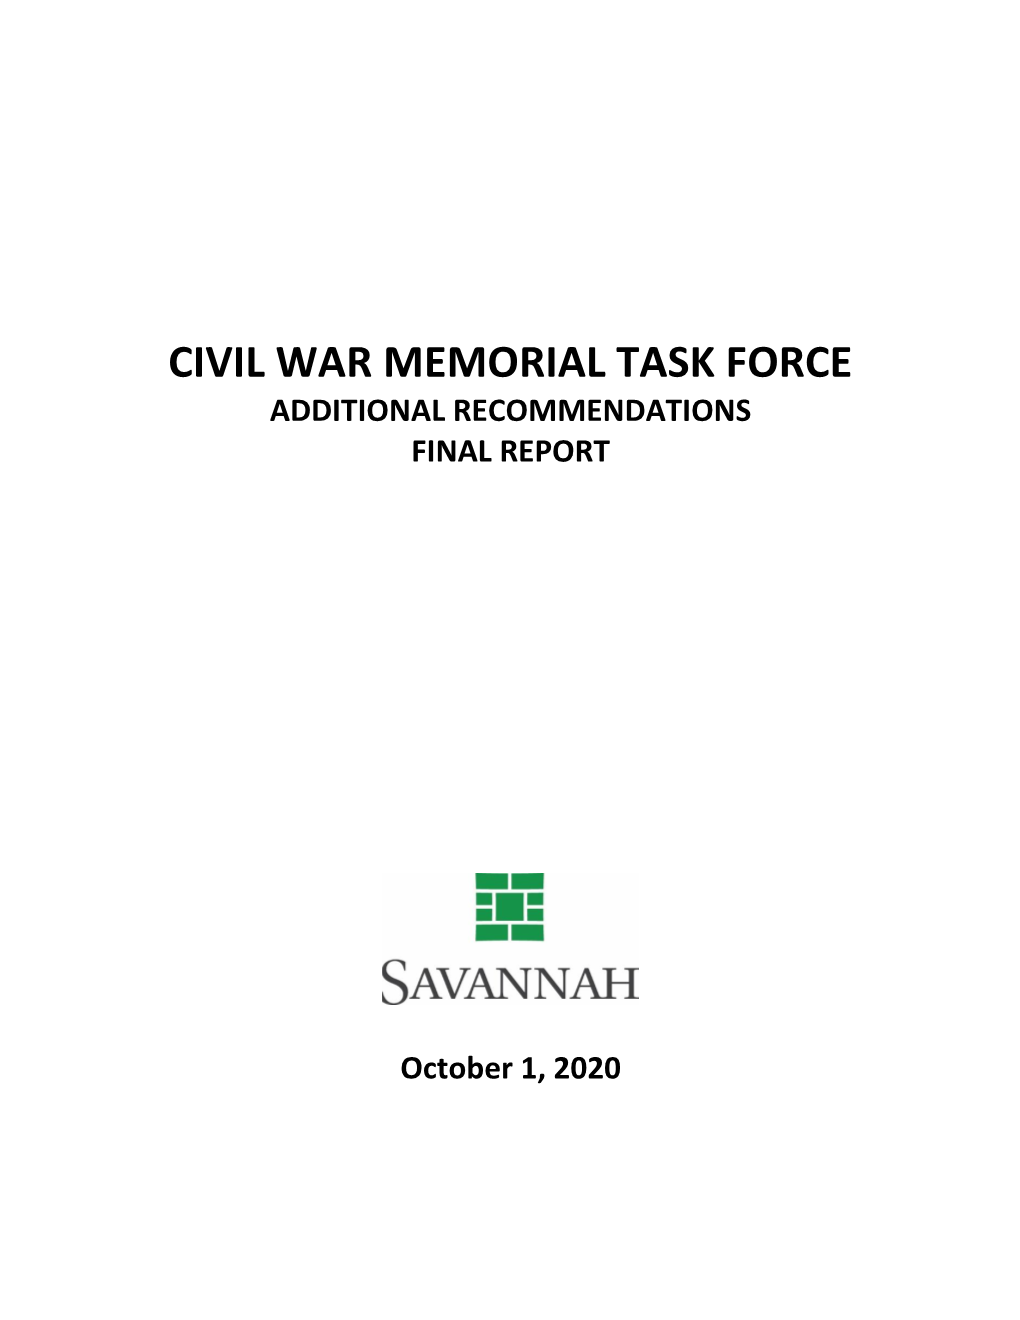 Civil War Memorial Task Force Additional Recommendations Final Report